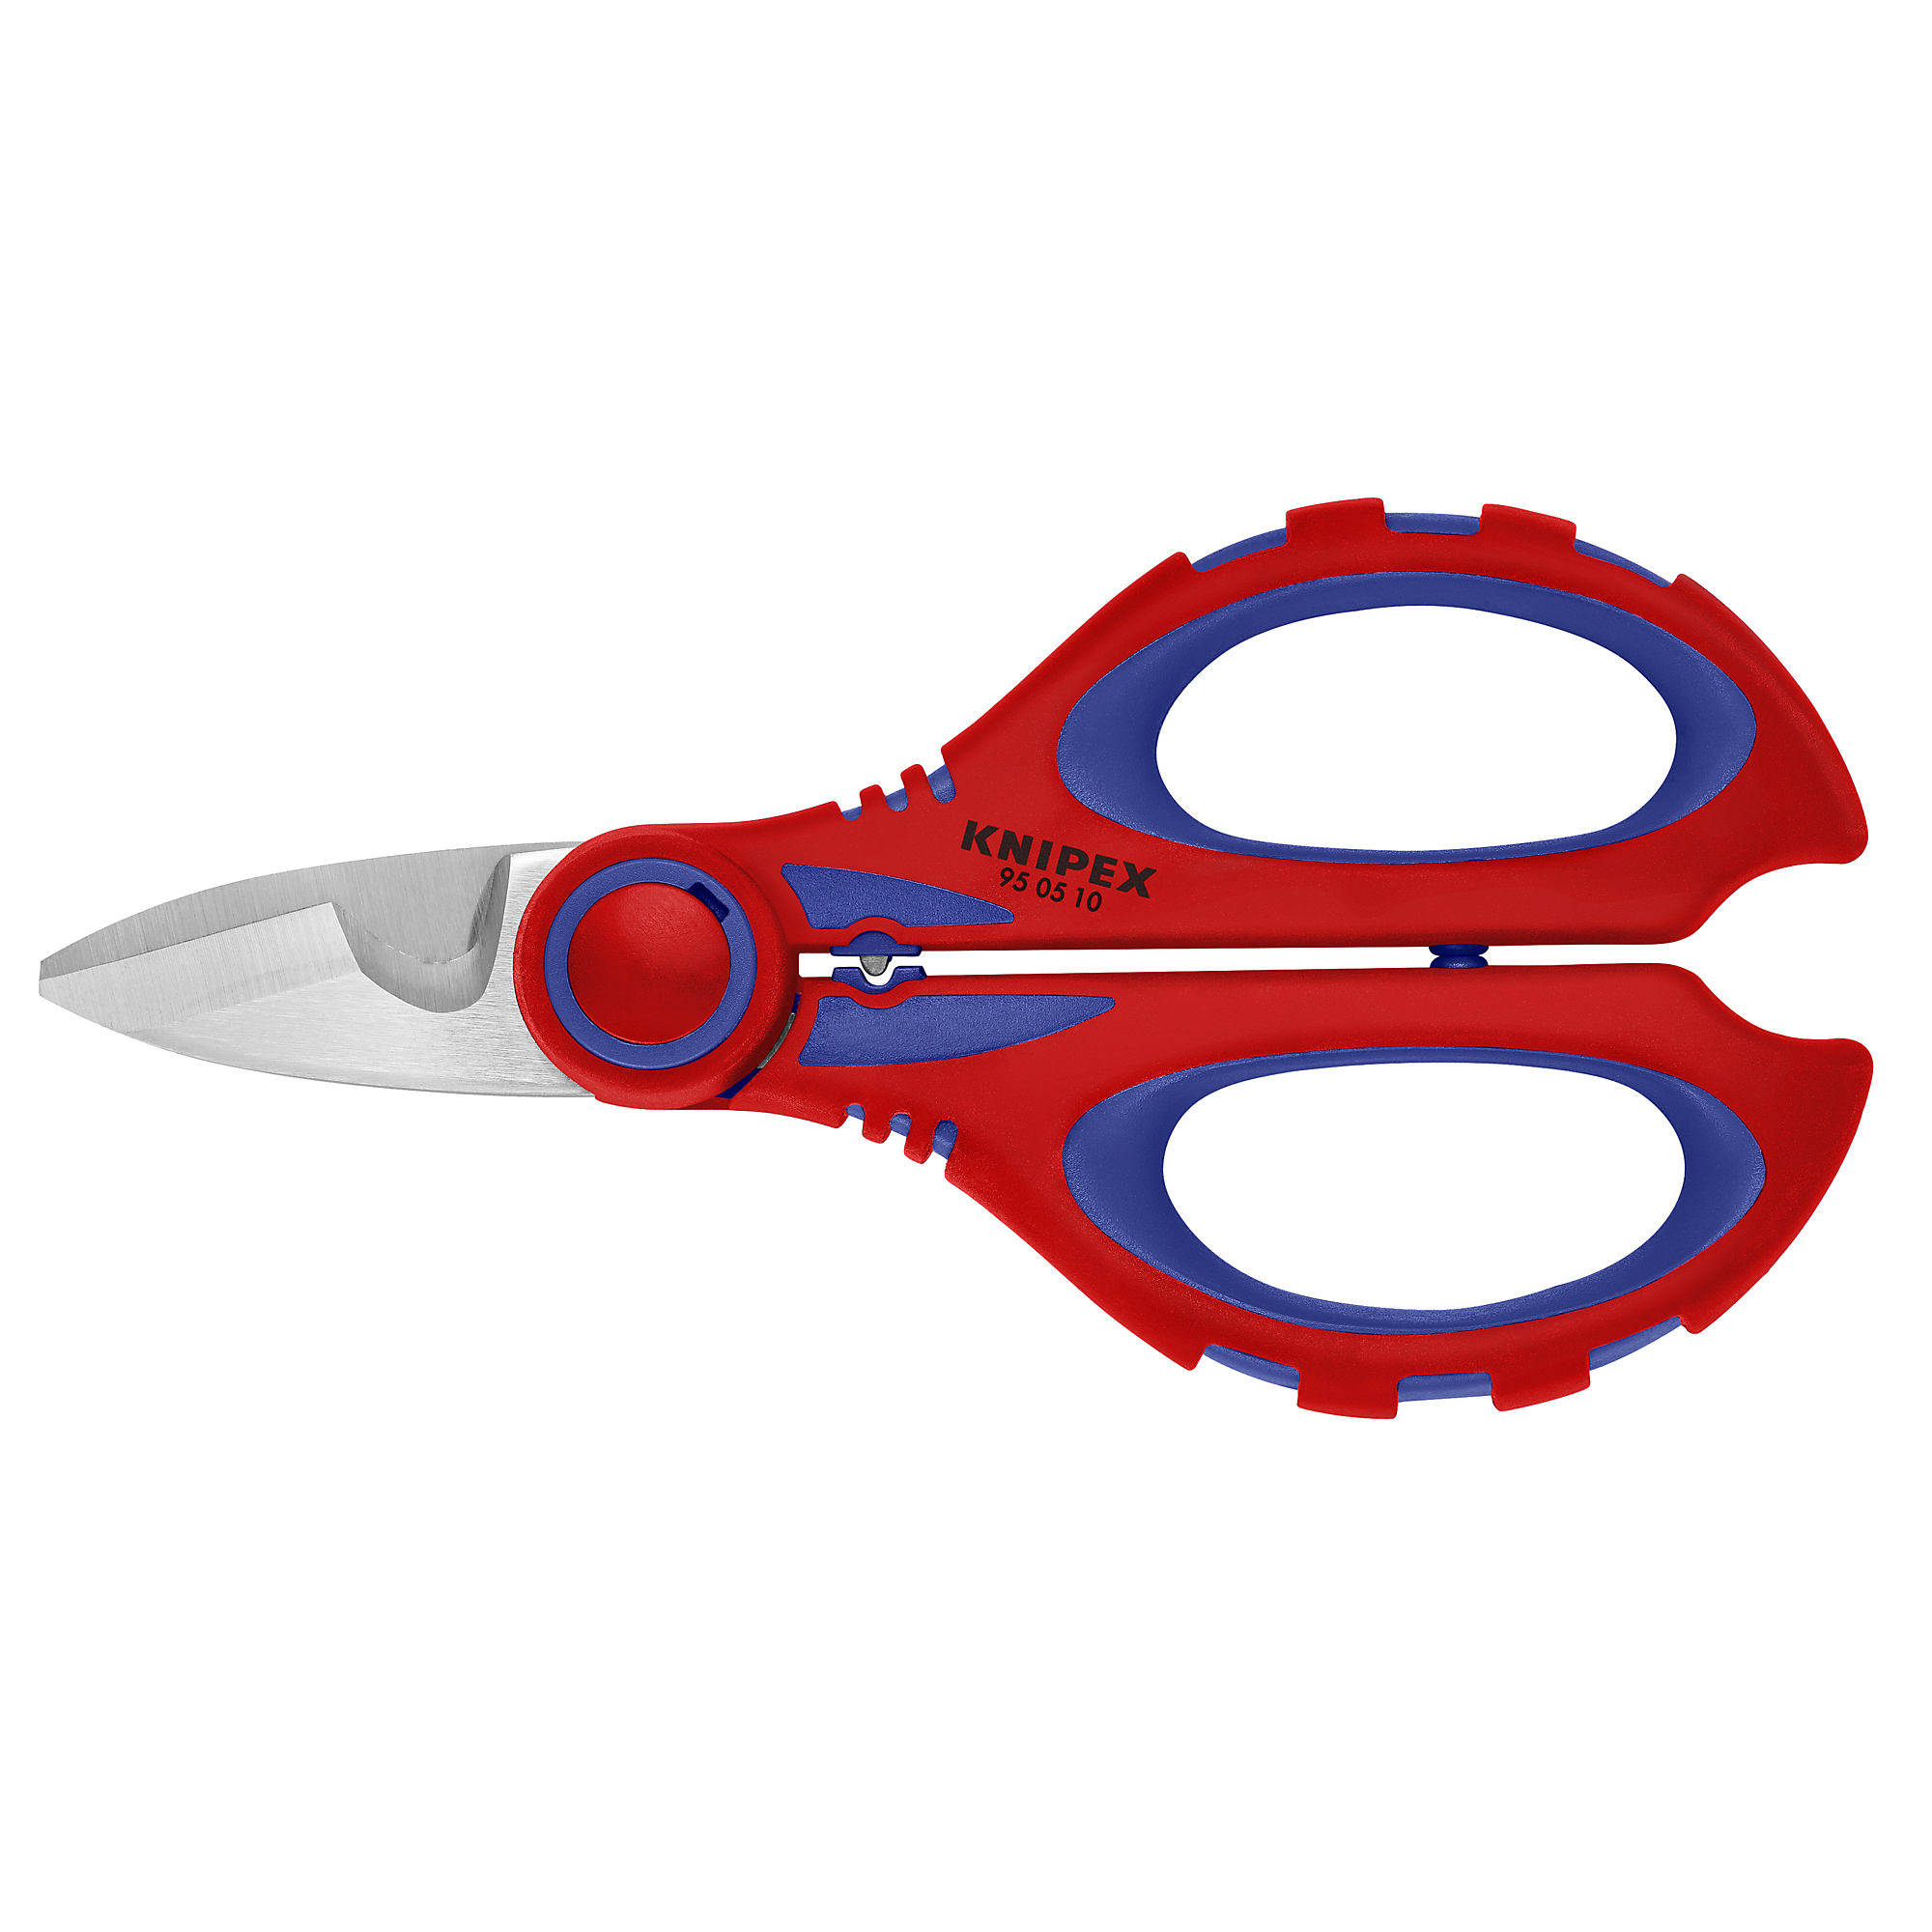 KNIPEX, Electricians Shears w/Crimper, Comfort grip,6.25Inch, Pieces (qty.) 1 Material Steel, Model 95 05 10 SBA